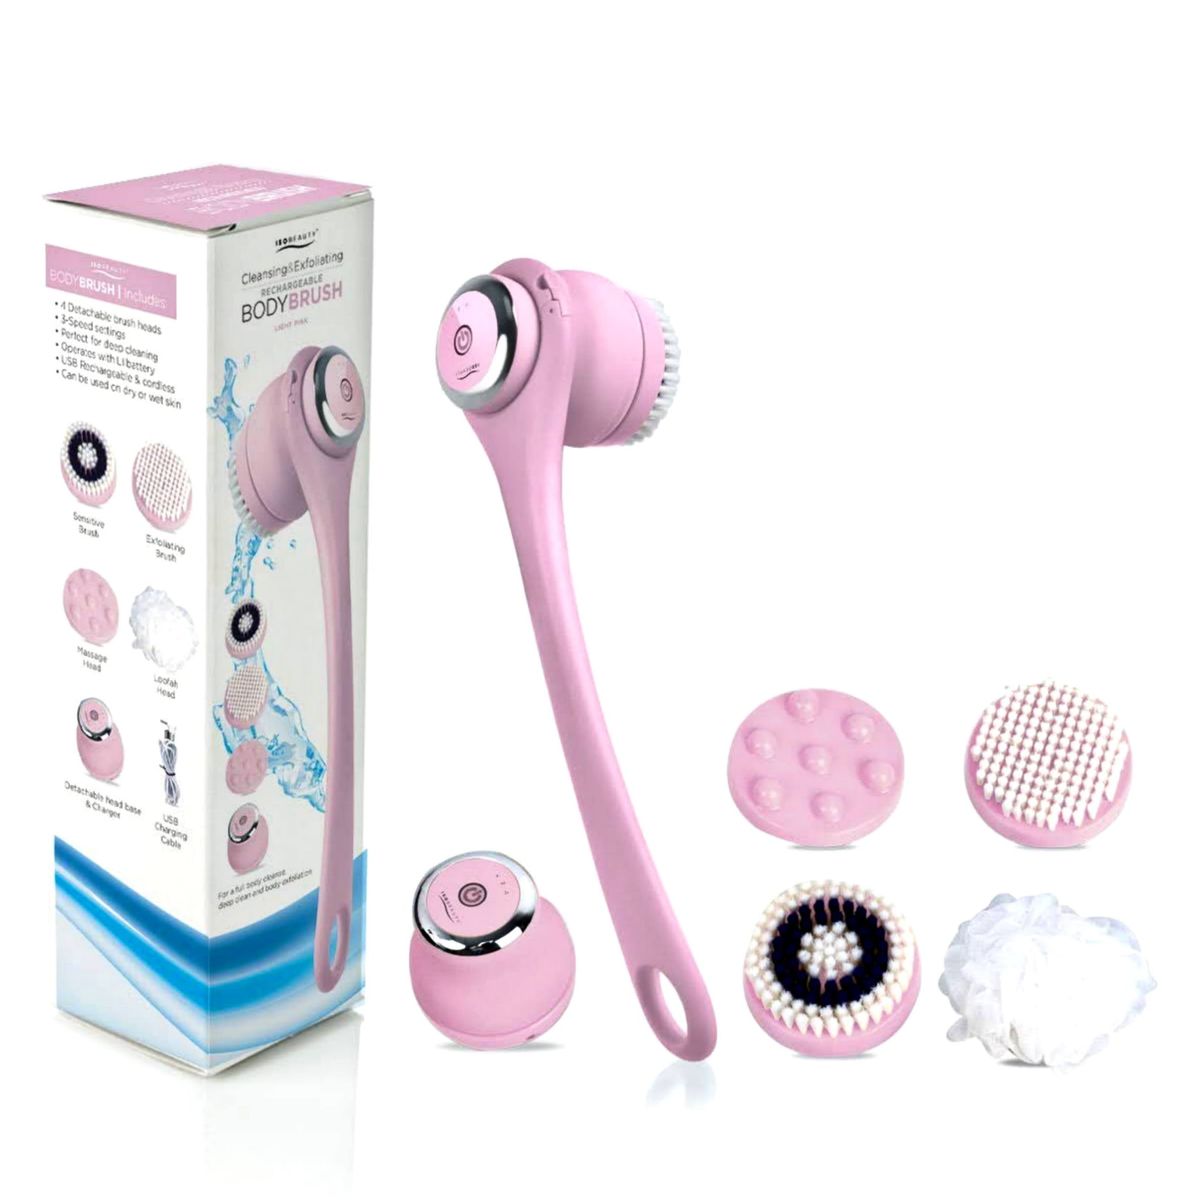 ISO Beauty™ Cleansing & Exfoliating Body Brushes - Light Pink